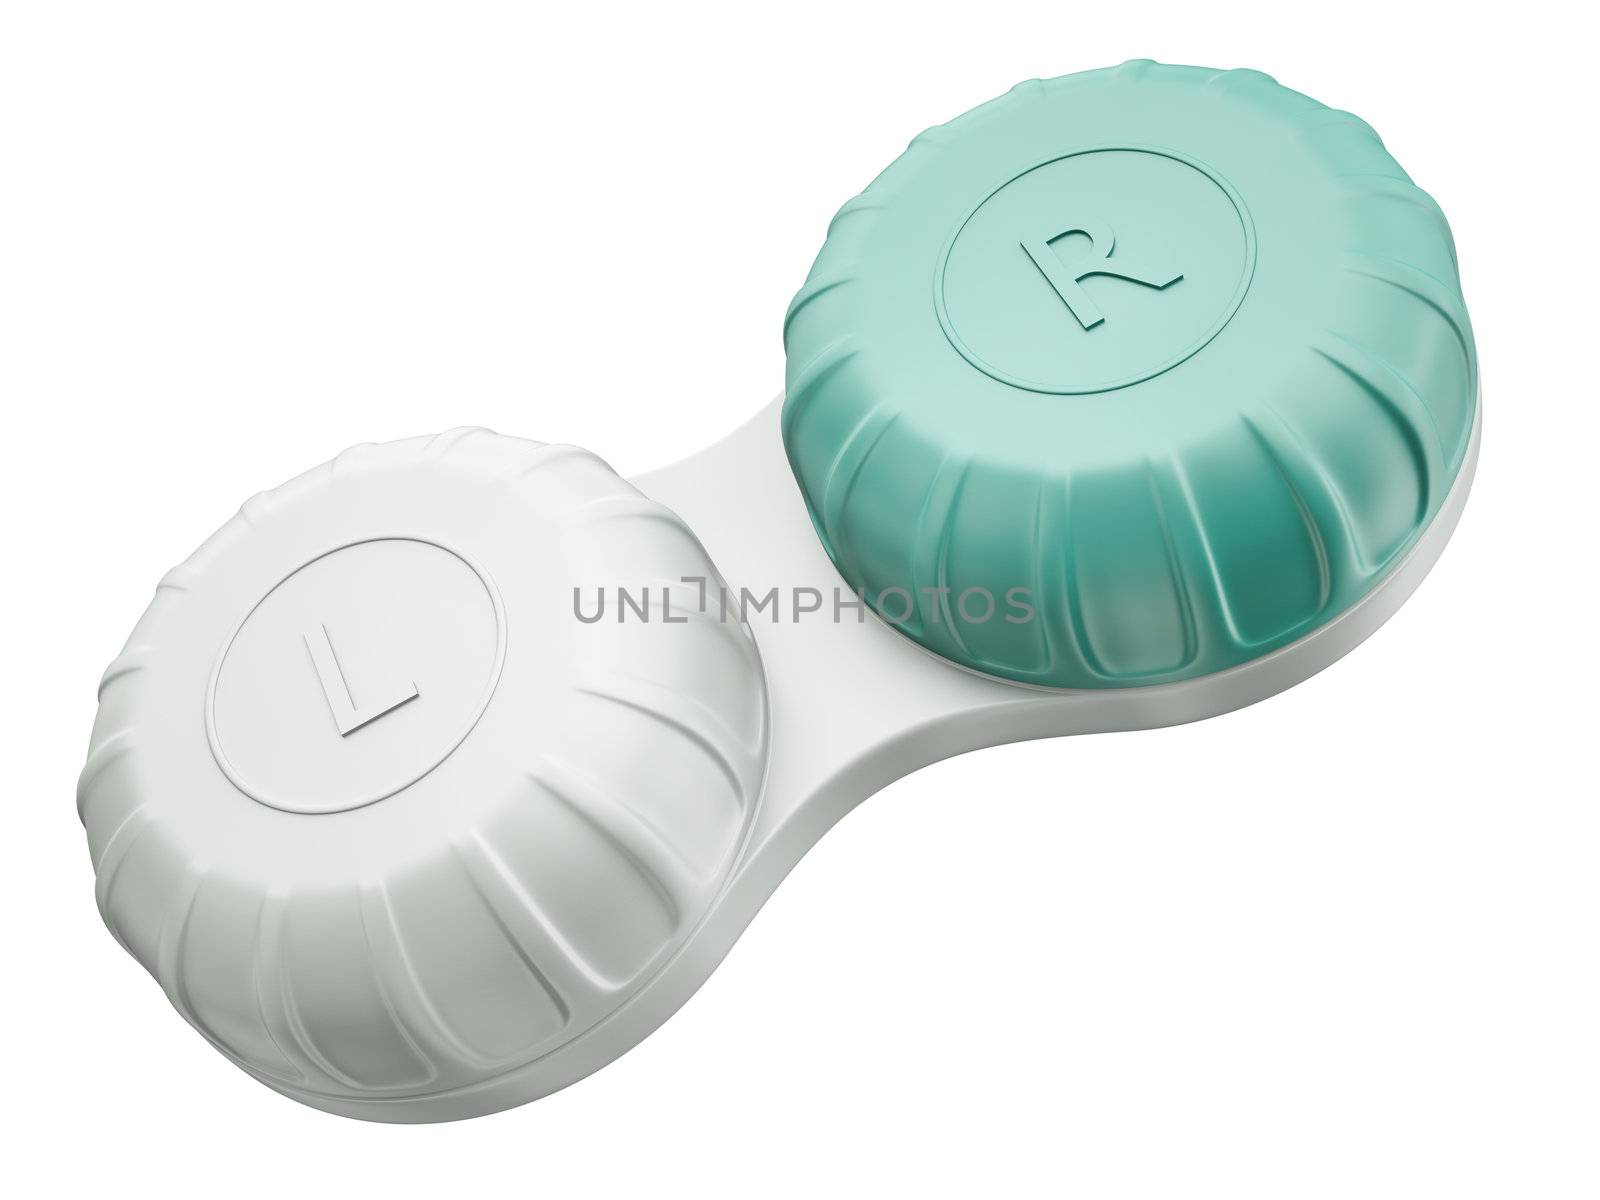 Contact lenses case isolated on white background. 3D render.